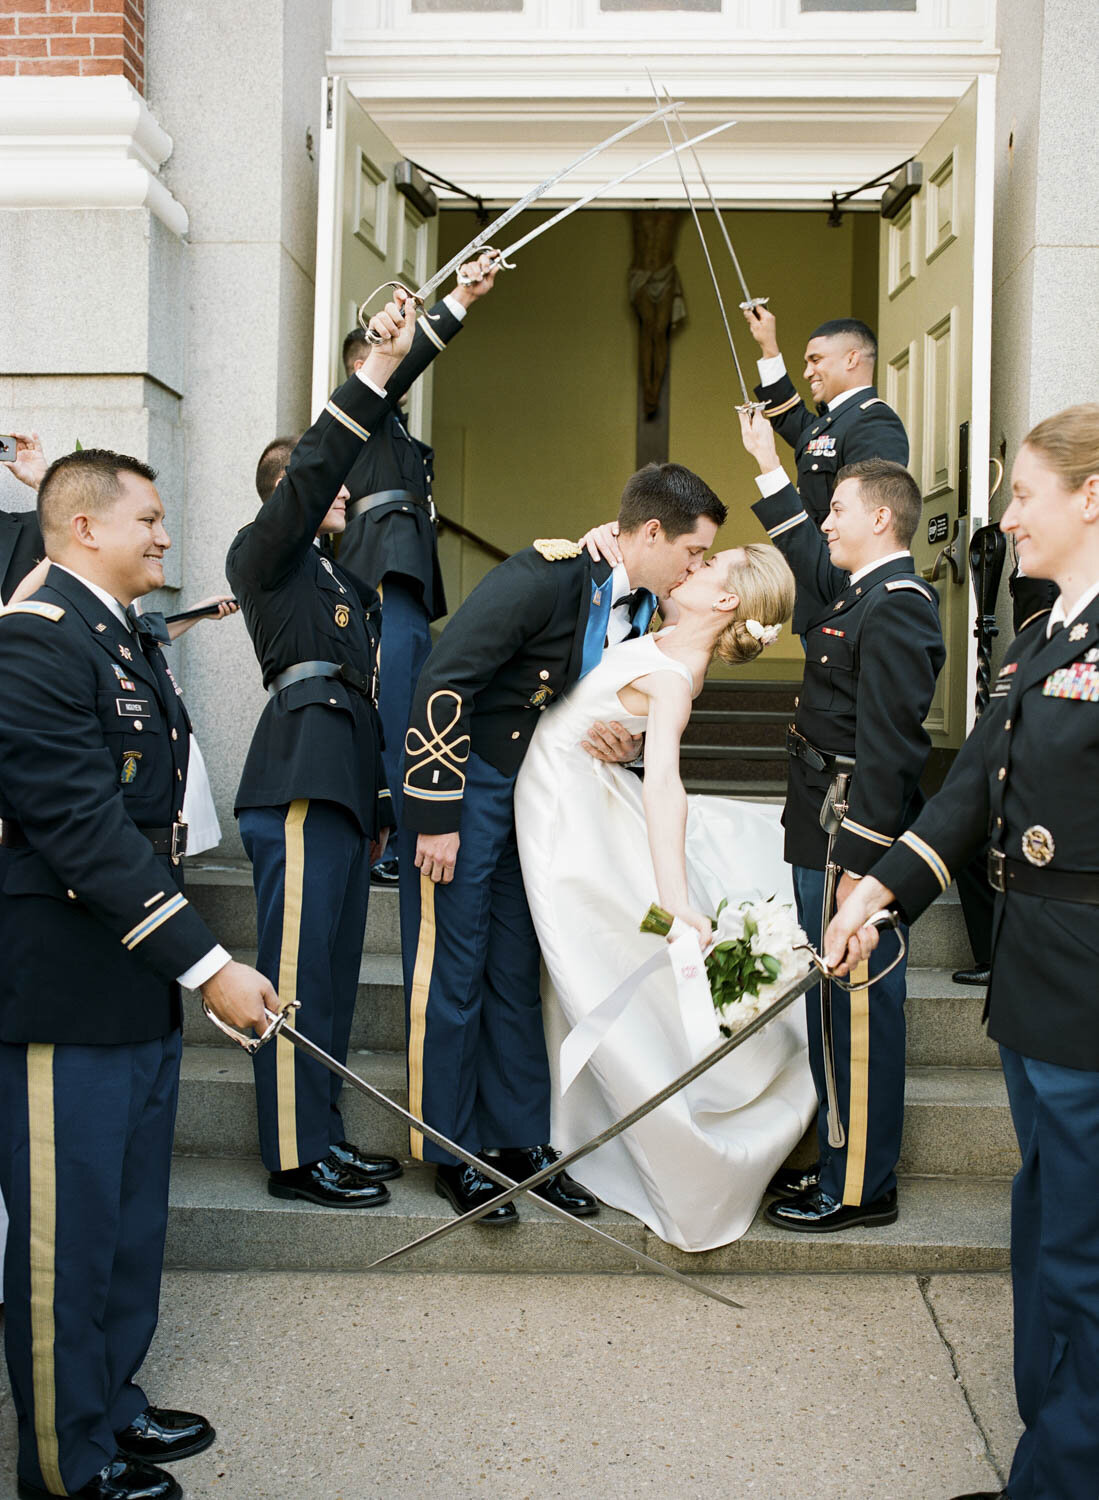 Baltimore church wedding with military sword arch